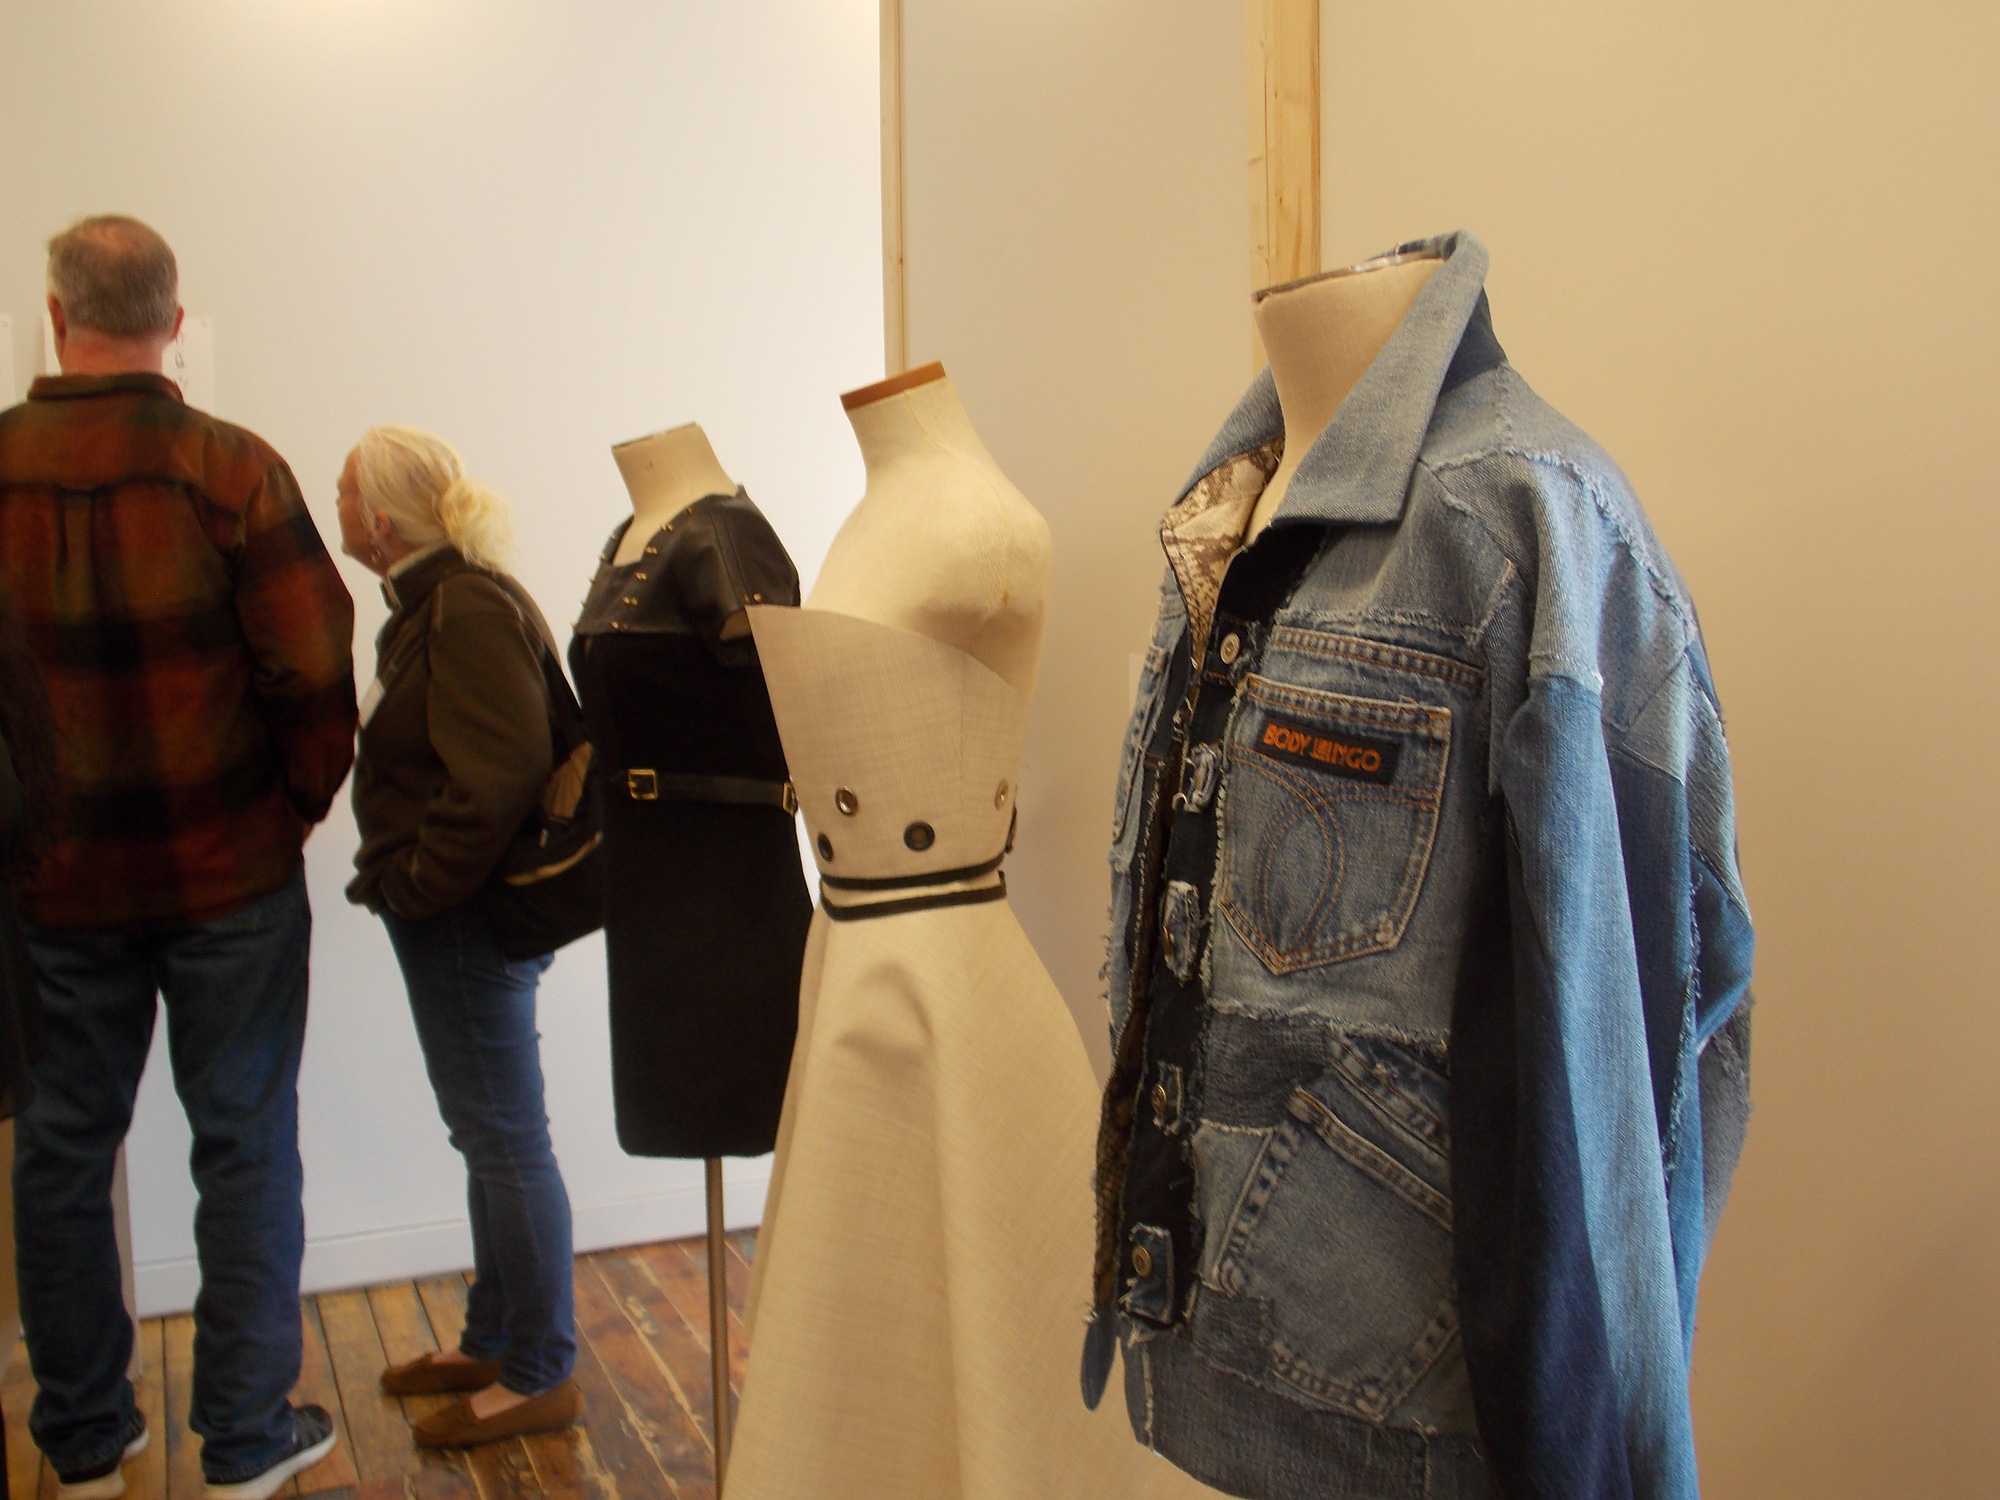 Clothing on display in the Activision exhibit. The exhibit is in the brand new HOW Space which has been renovated by Appalachian State University students enrolled in the IDEXlab course over the past year and is located across from The Local at 182 Howard Street.